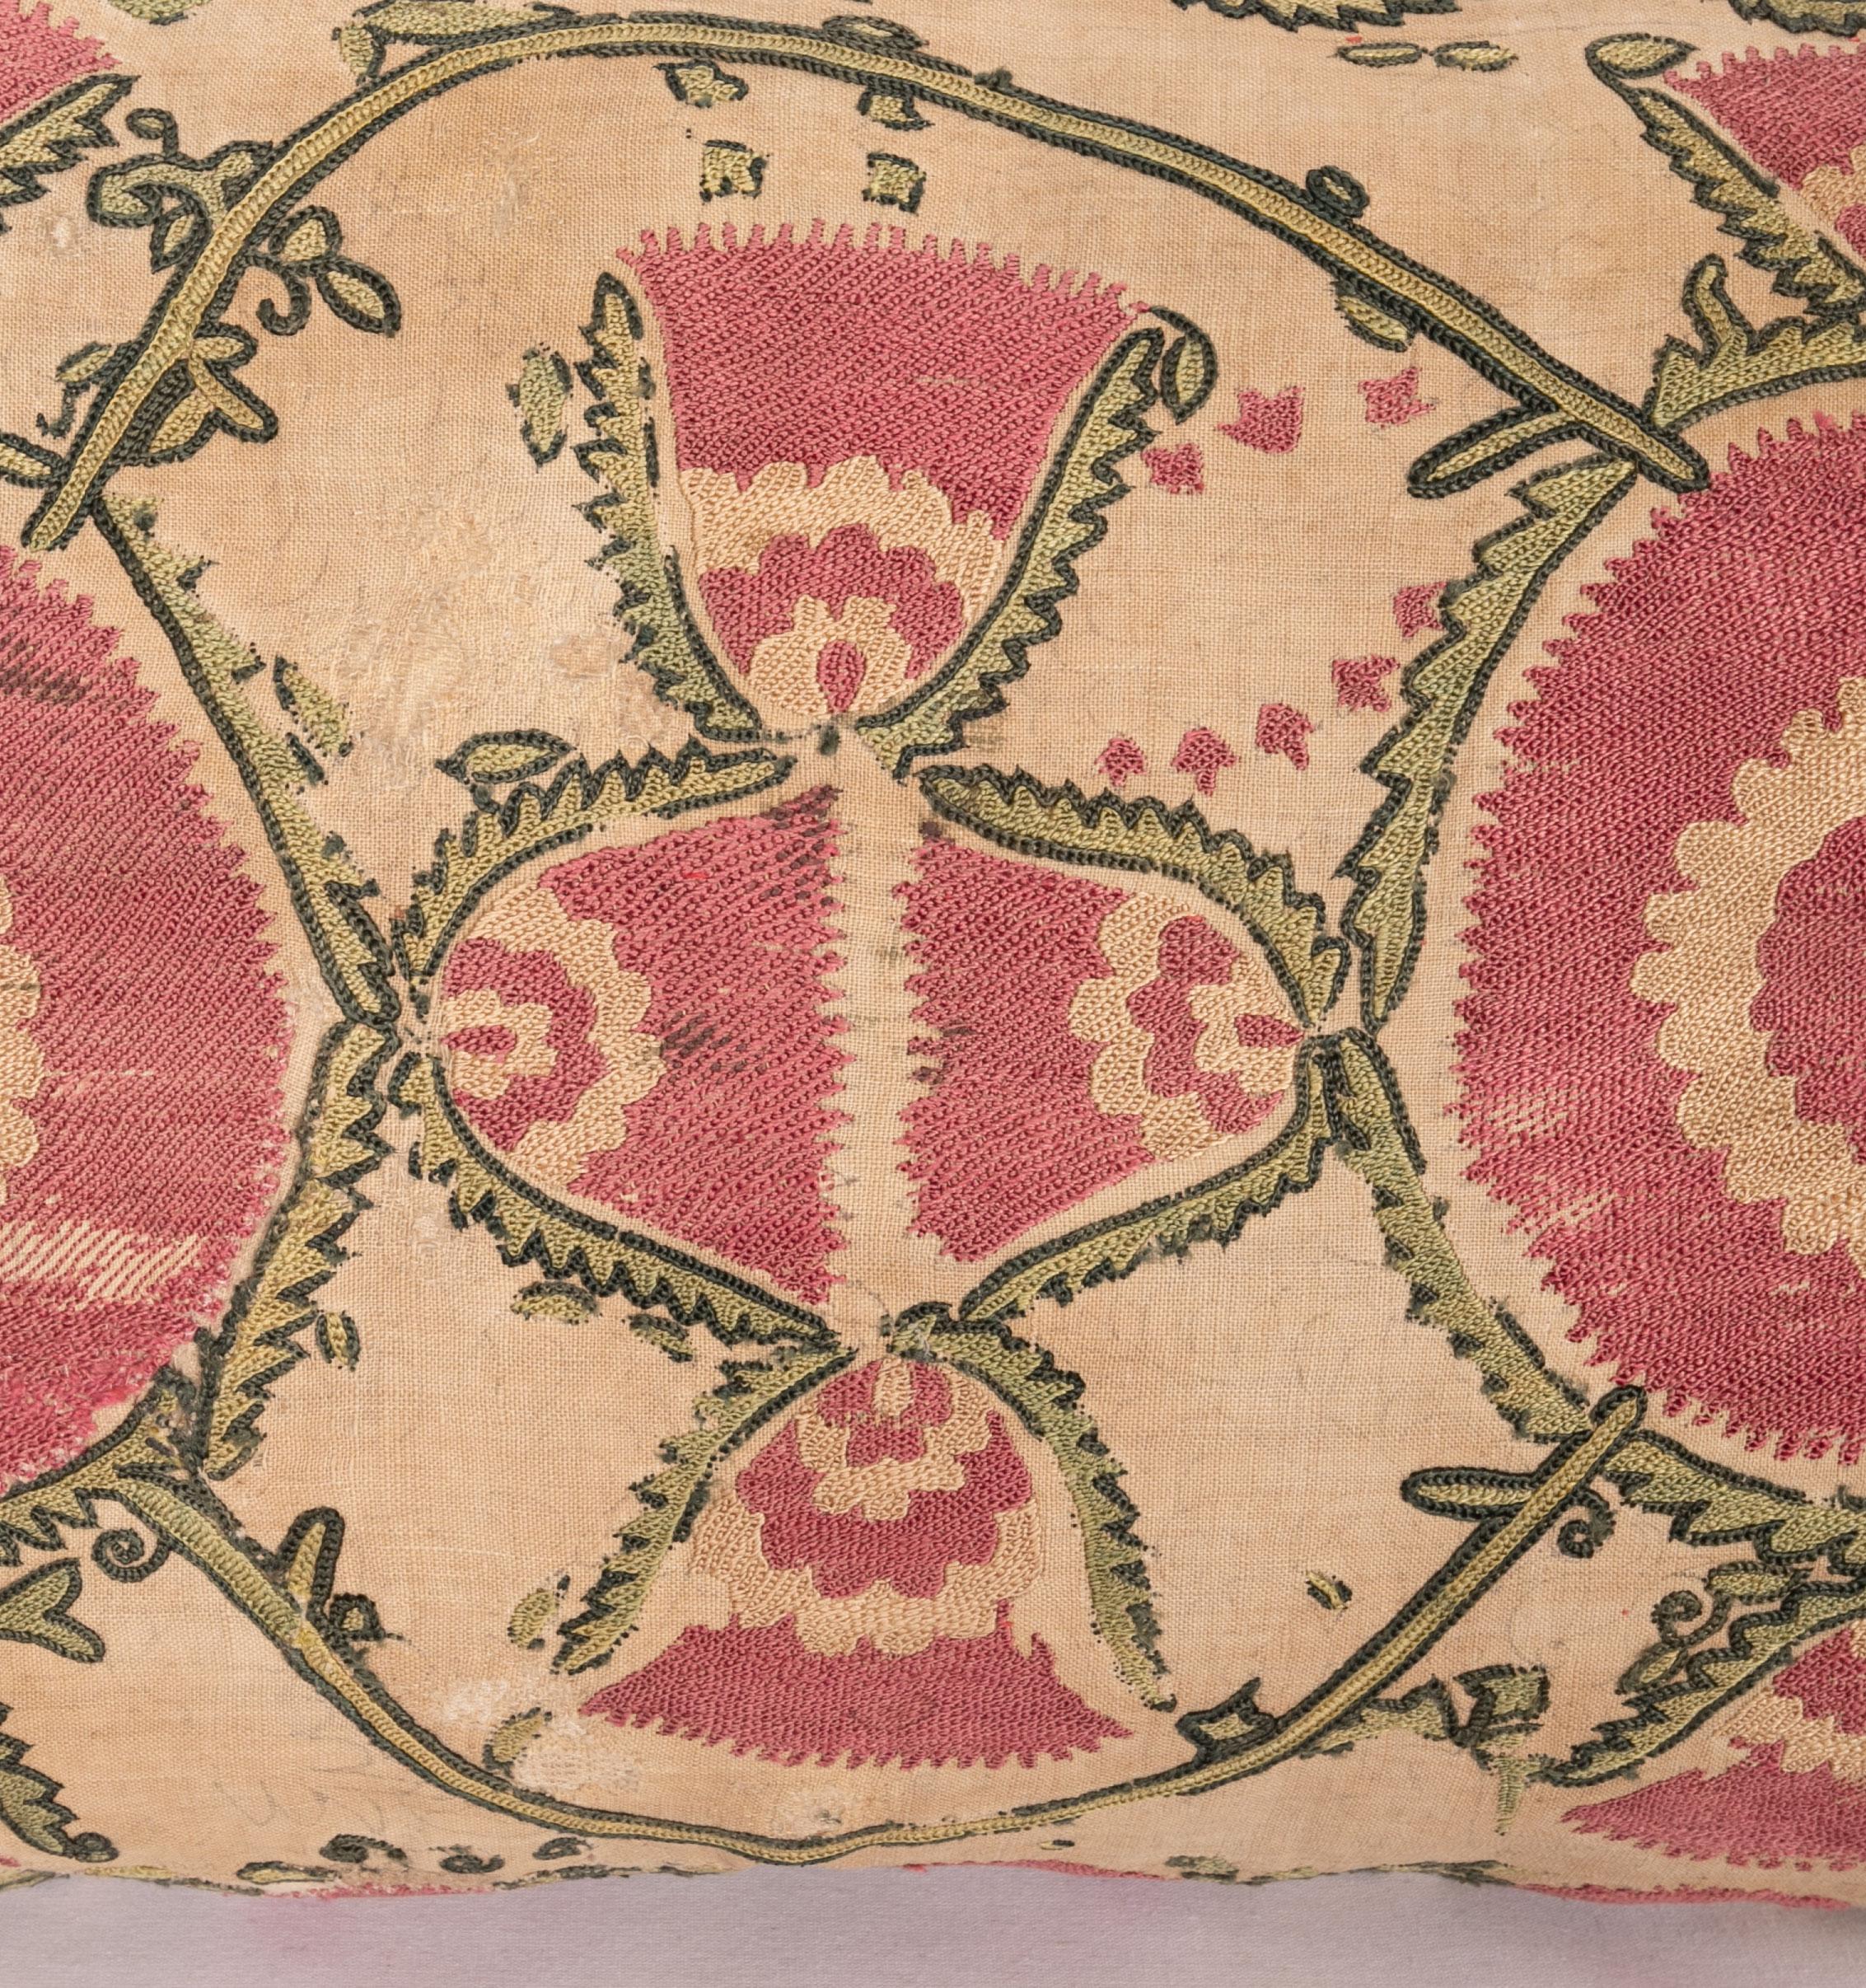 Embroidered Antique Suzani Pillow Case Fashioned from a Mid-19th Century Tajik Suzani